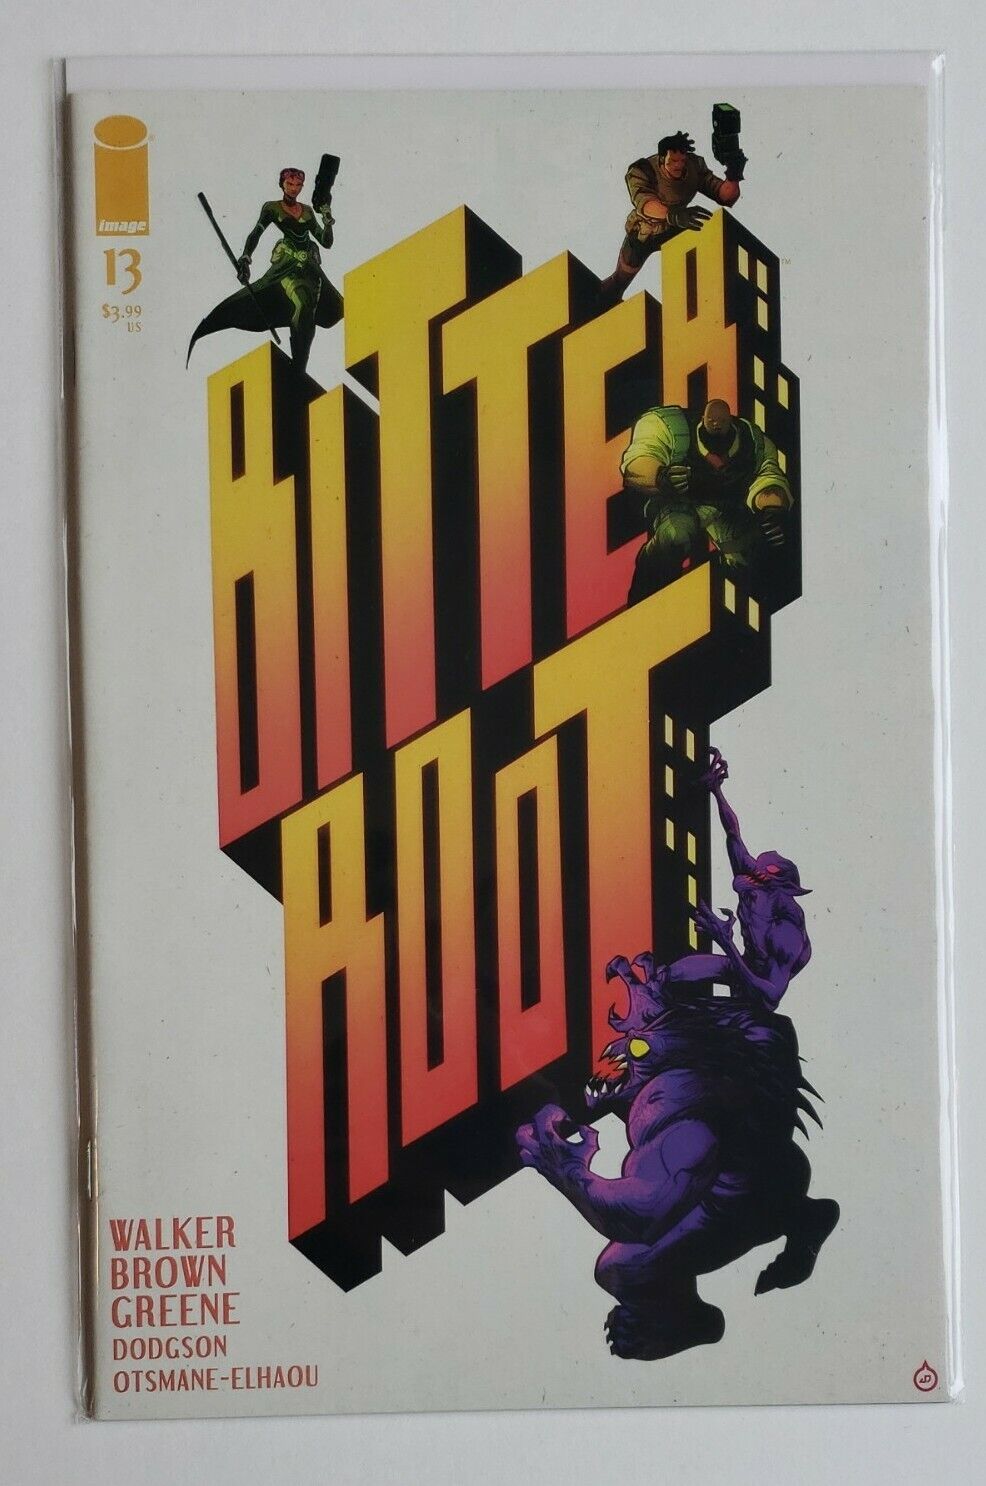 Bitter Root #13 Variant Cover Homage to Beat Street Image Comics | eBay